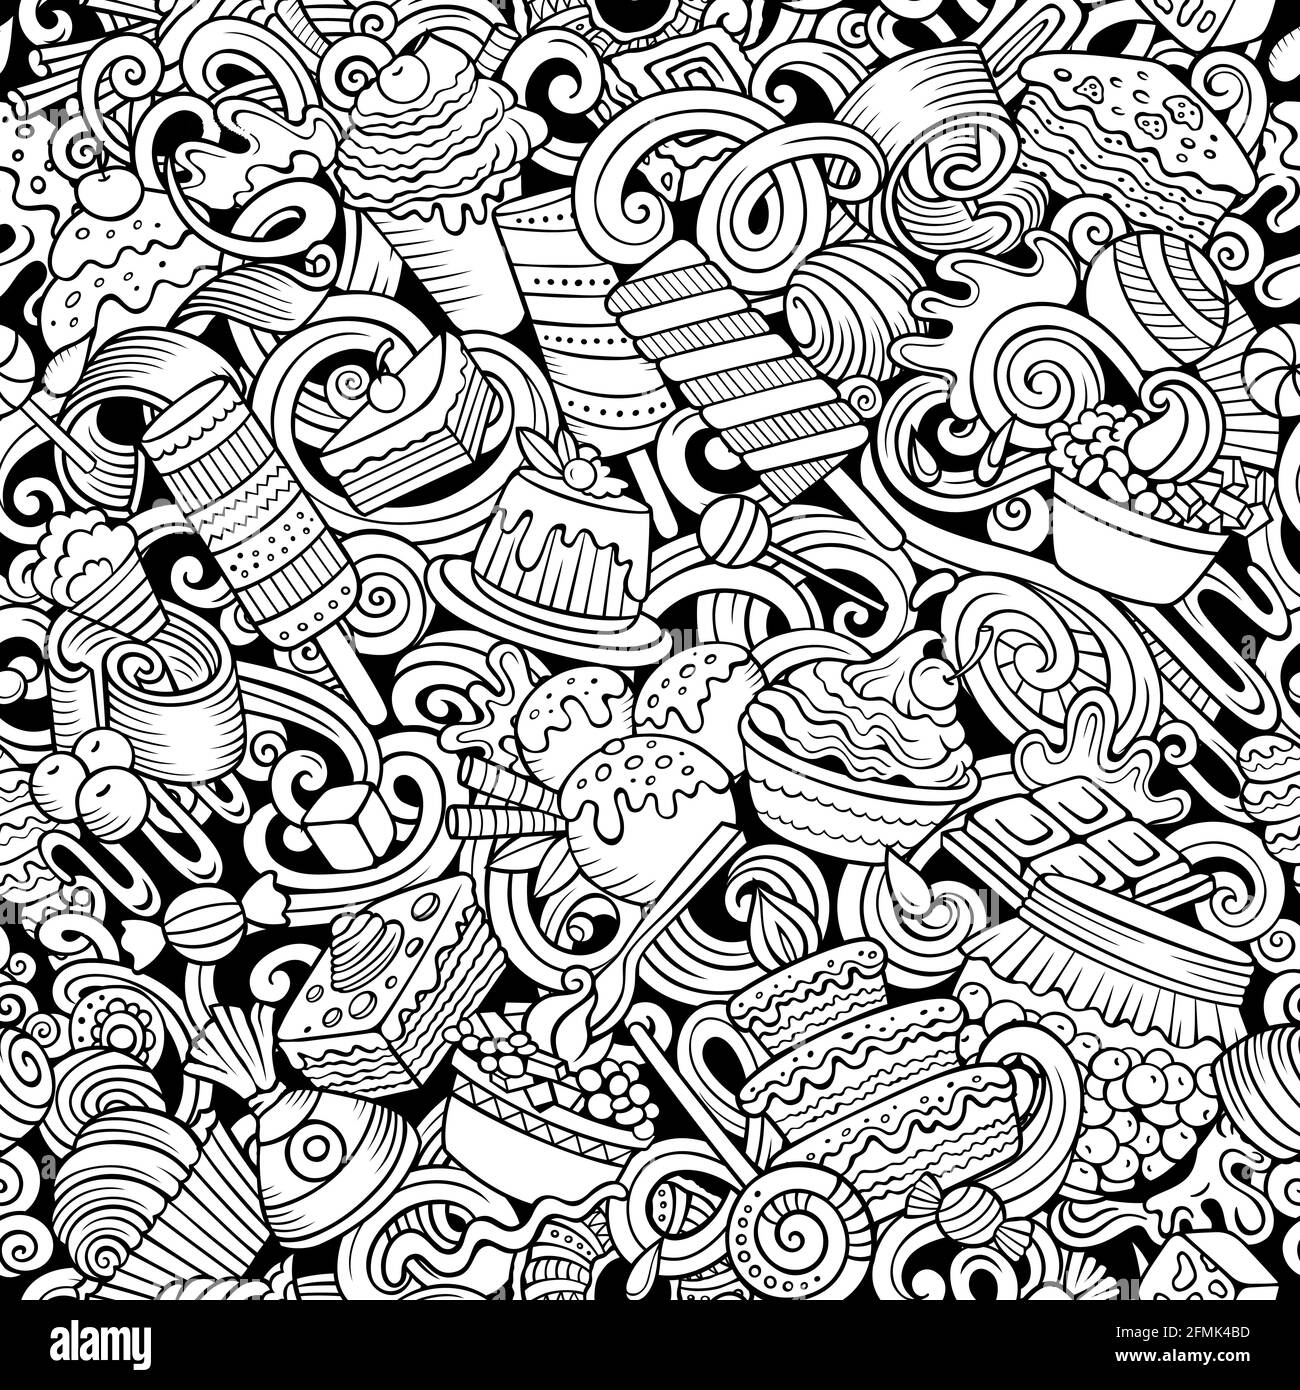 Cartoon doodles Desserts seamless pattern. Backdrop with sweet food symbols and items. Sketchy detailed background for print on fabric, wrapping paper Stock Vector